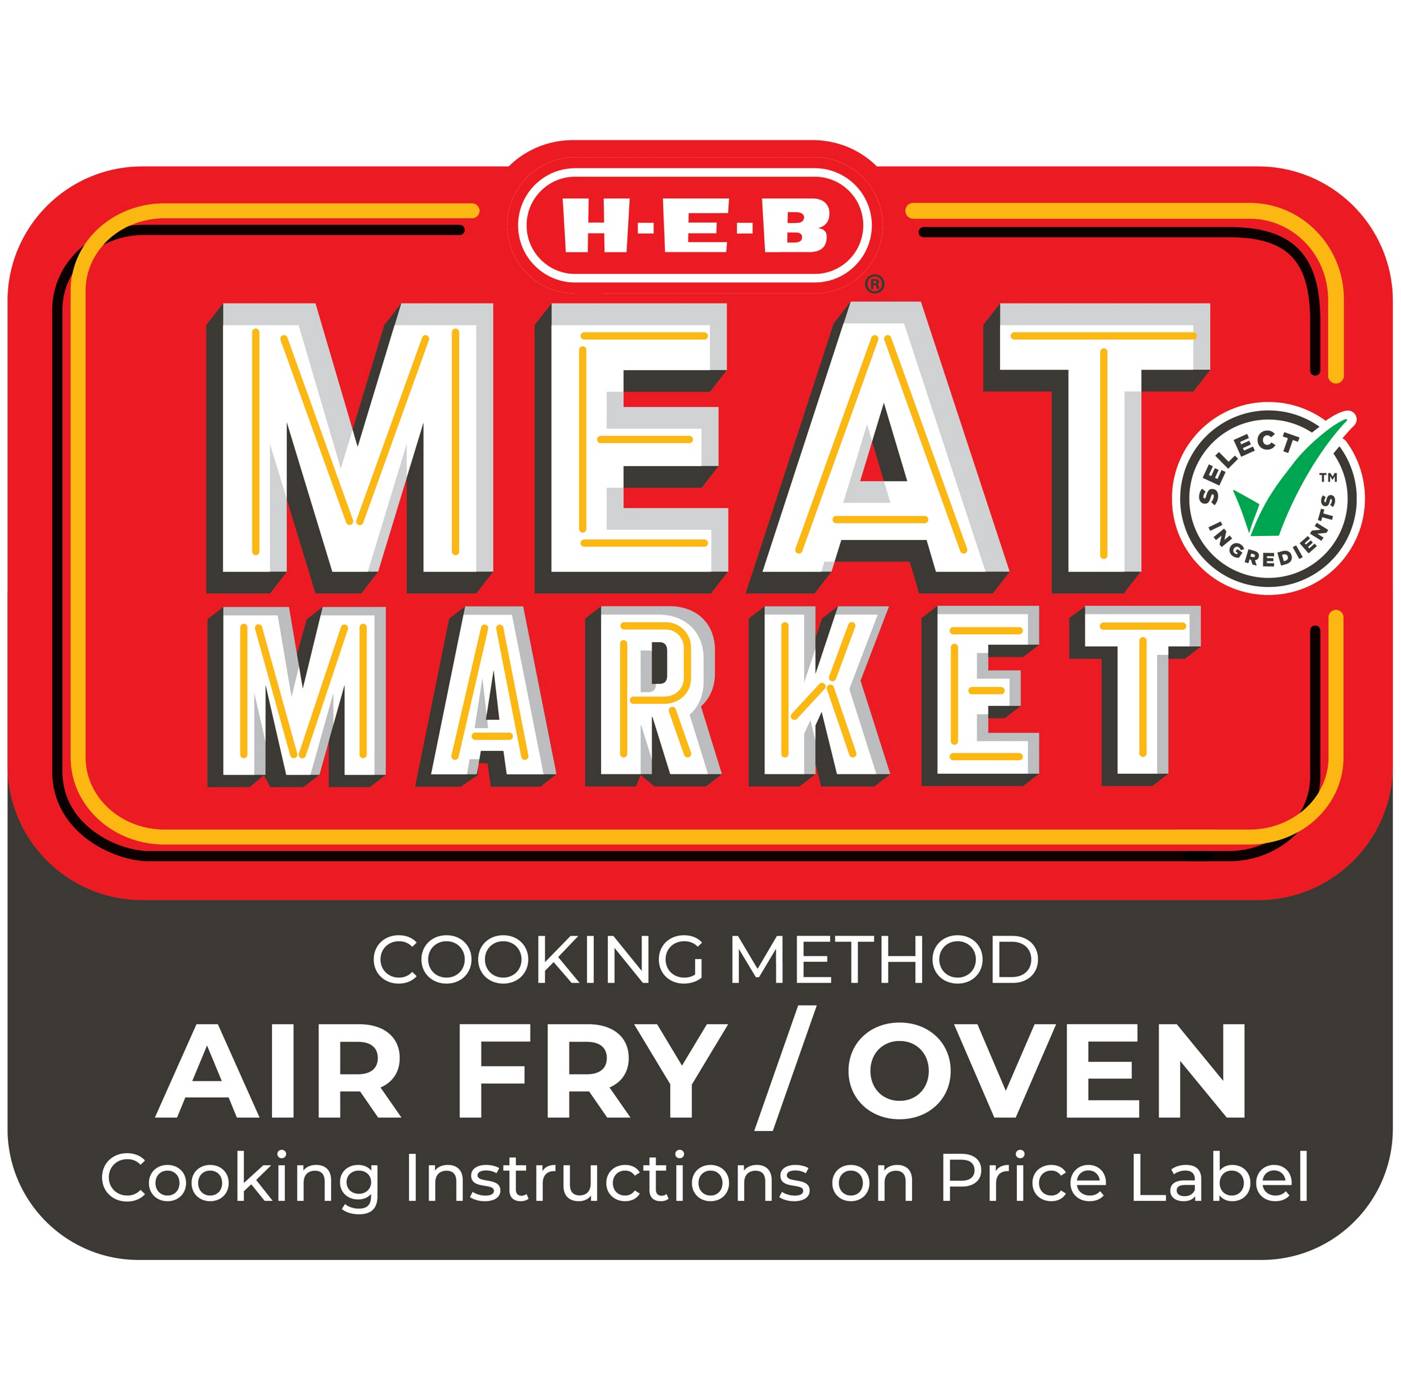 H-E-B Meat Market Marinated Chicken Wings - Garlic Parmesan; image 3 of 4